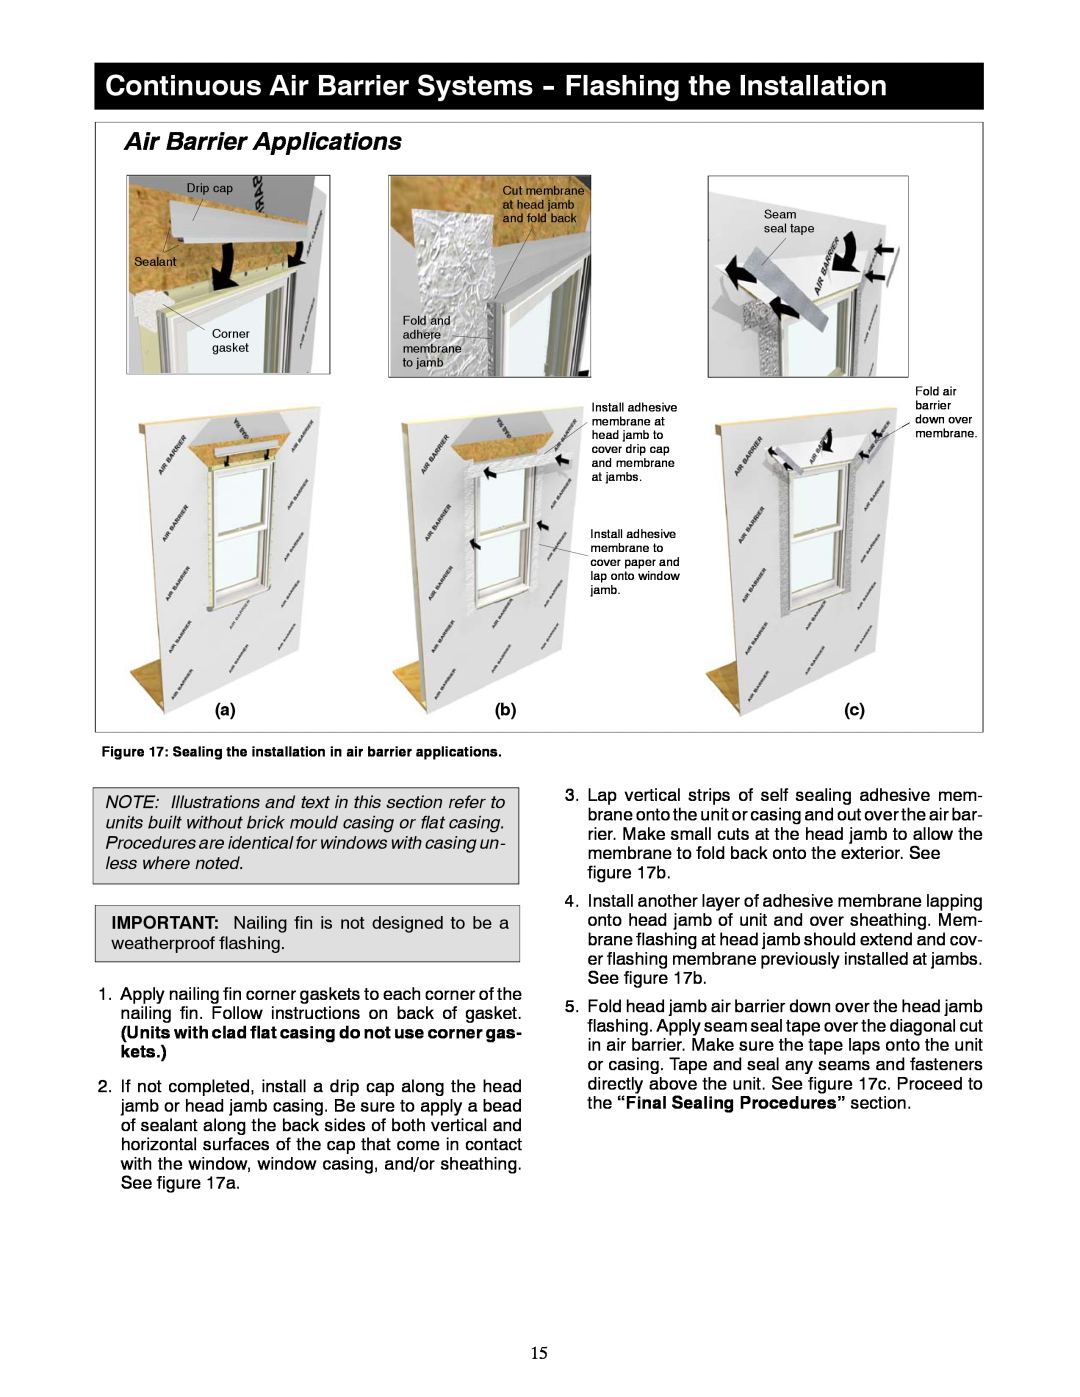 Marvin Window manual Continuous Air Barrier Systems - Flashing the Installation, Air Barrier Applications 